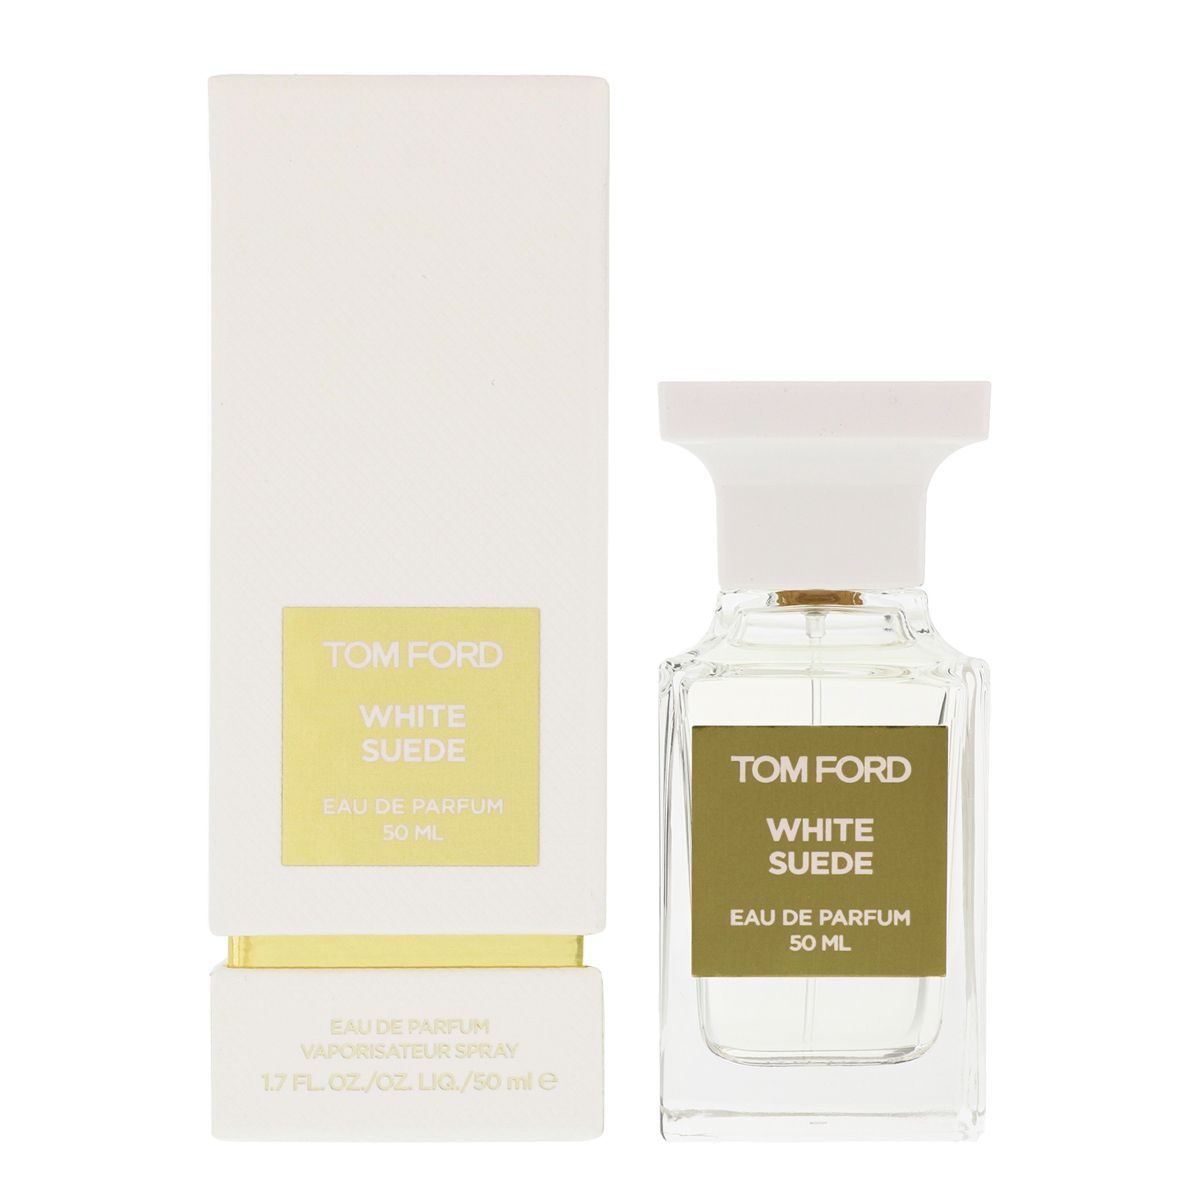  Tom Ford White Suede 